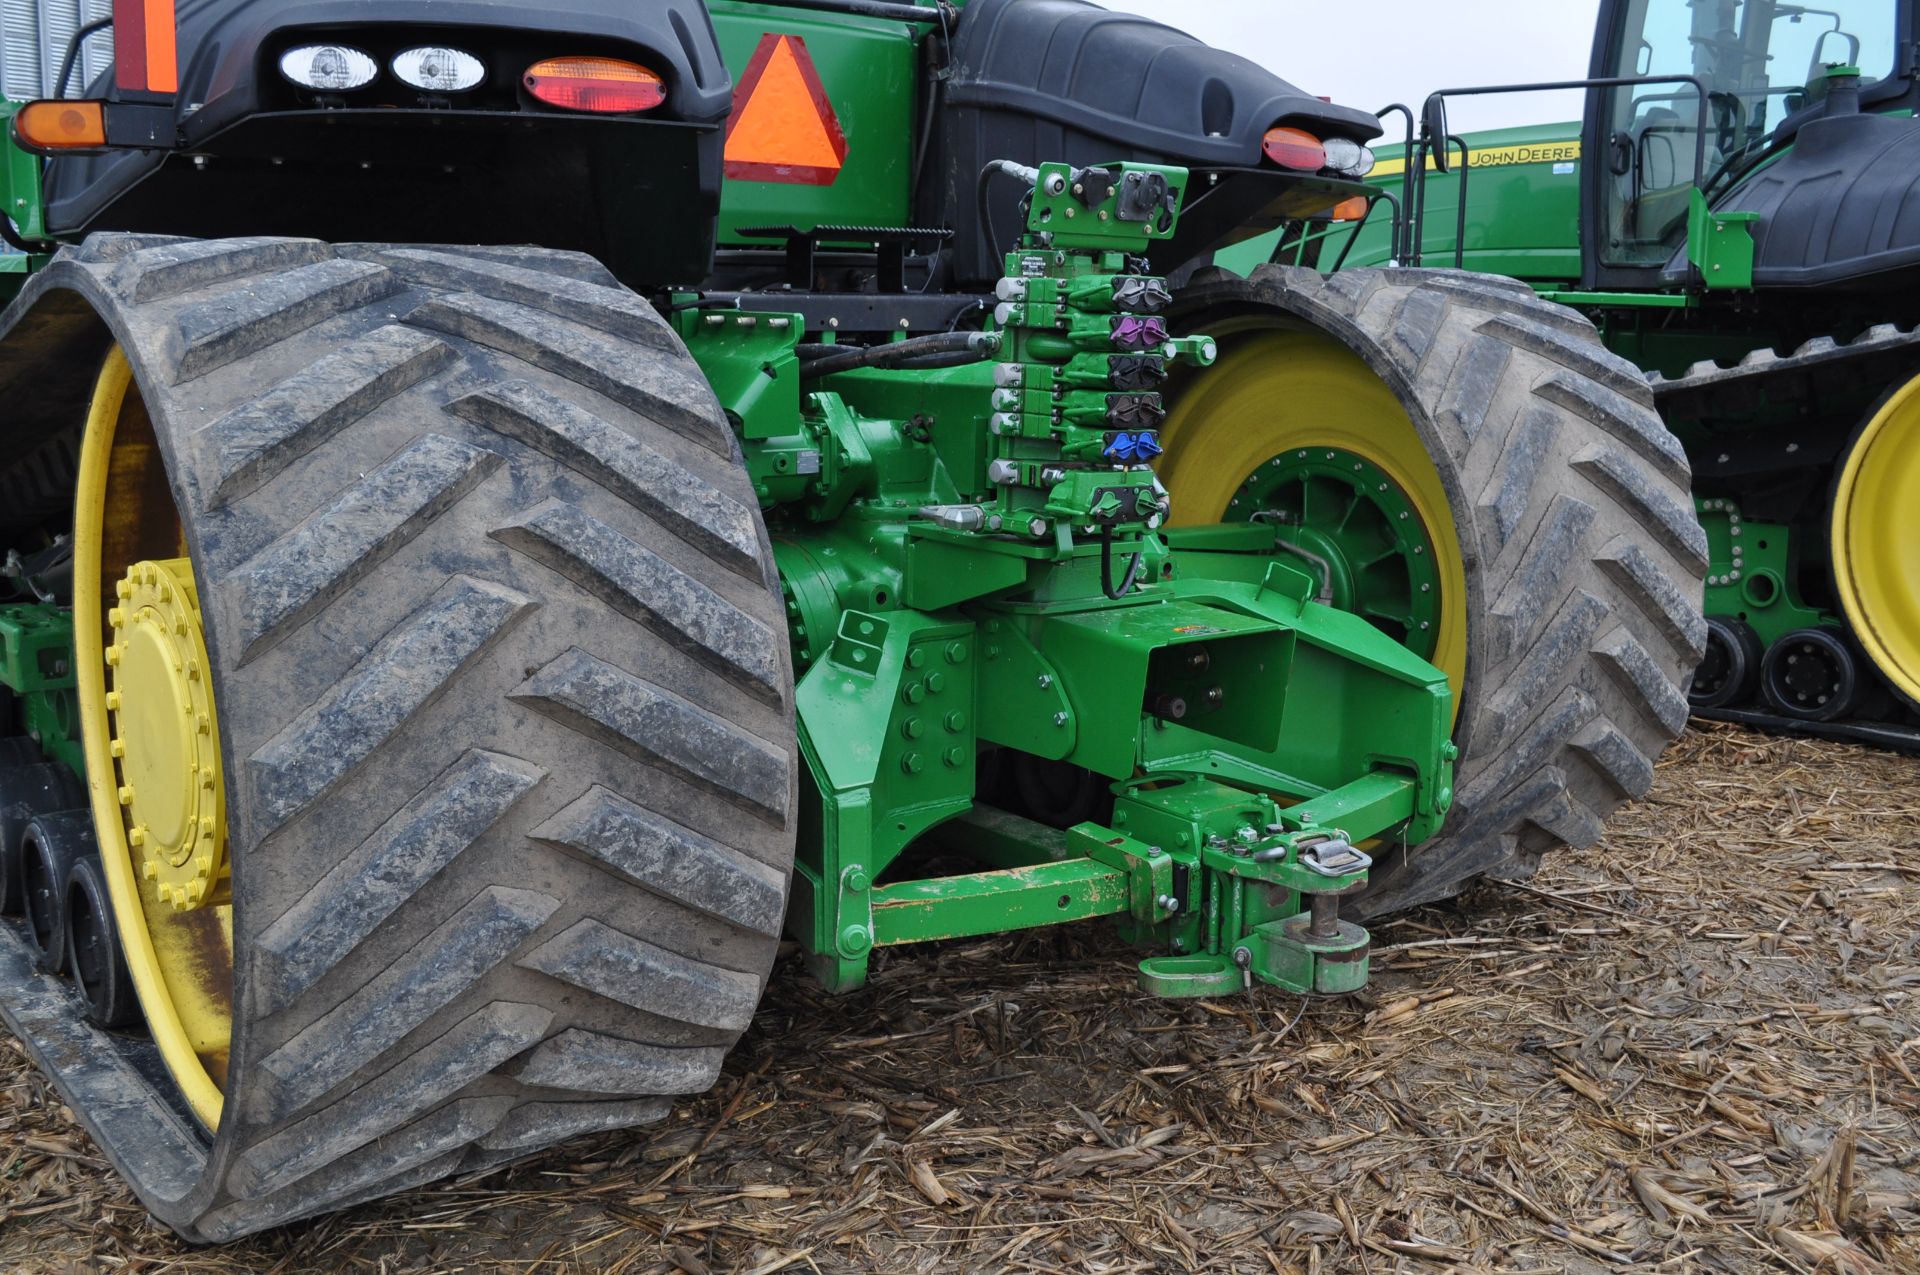 John Deere 9510RT track tractor, 36” belts, front weights, Powershift, 6 hyd remotes, 1000 PTO - Image 18 of 37